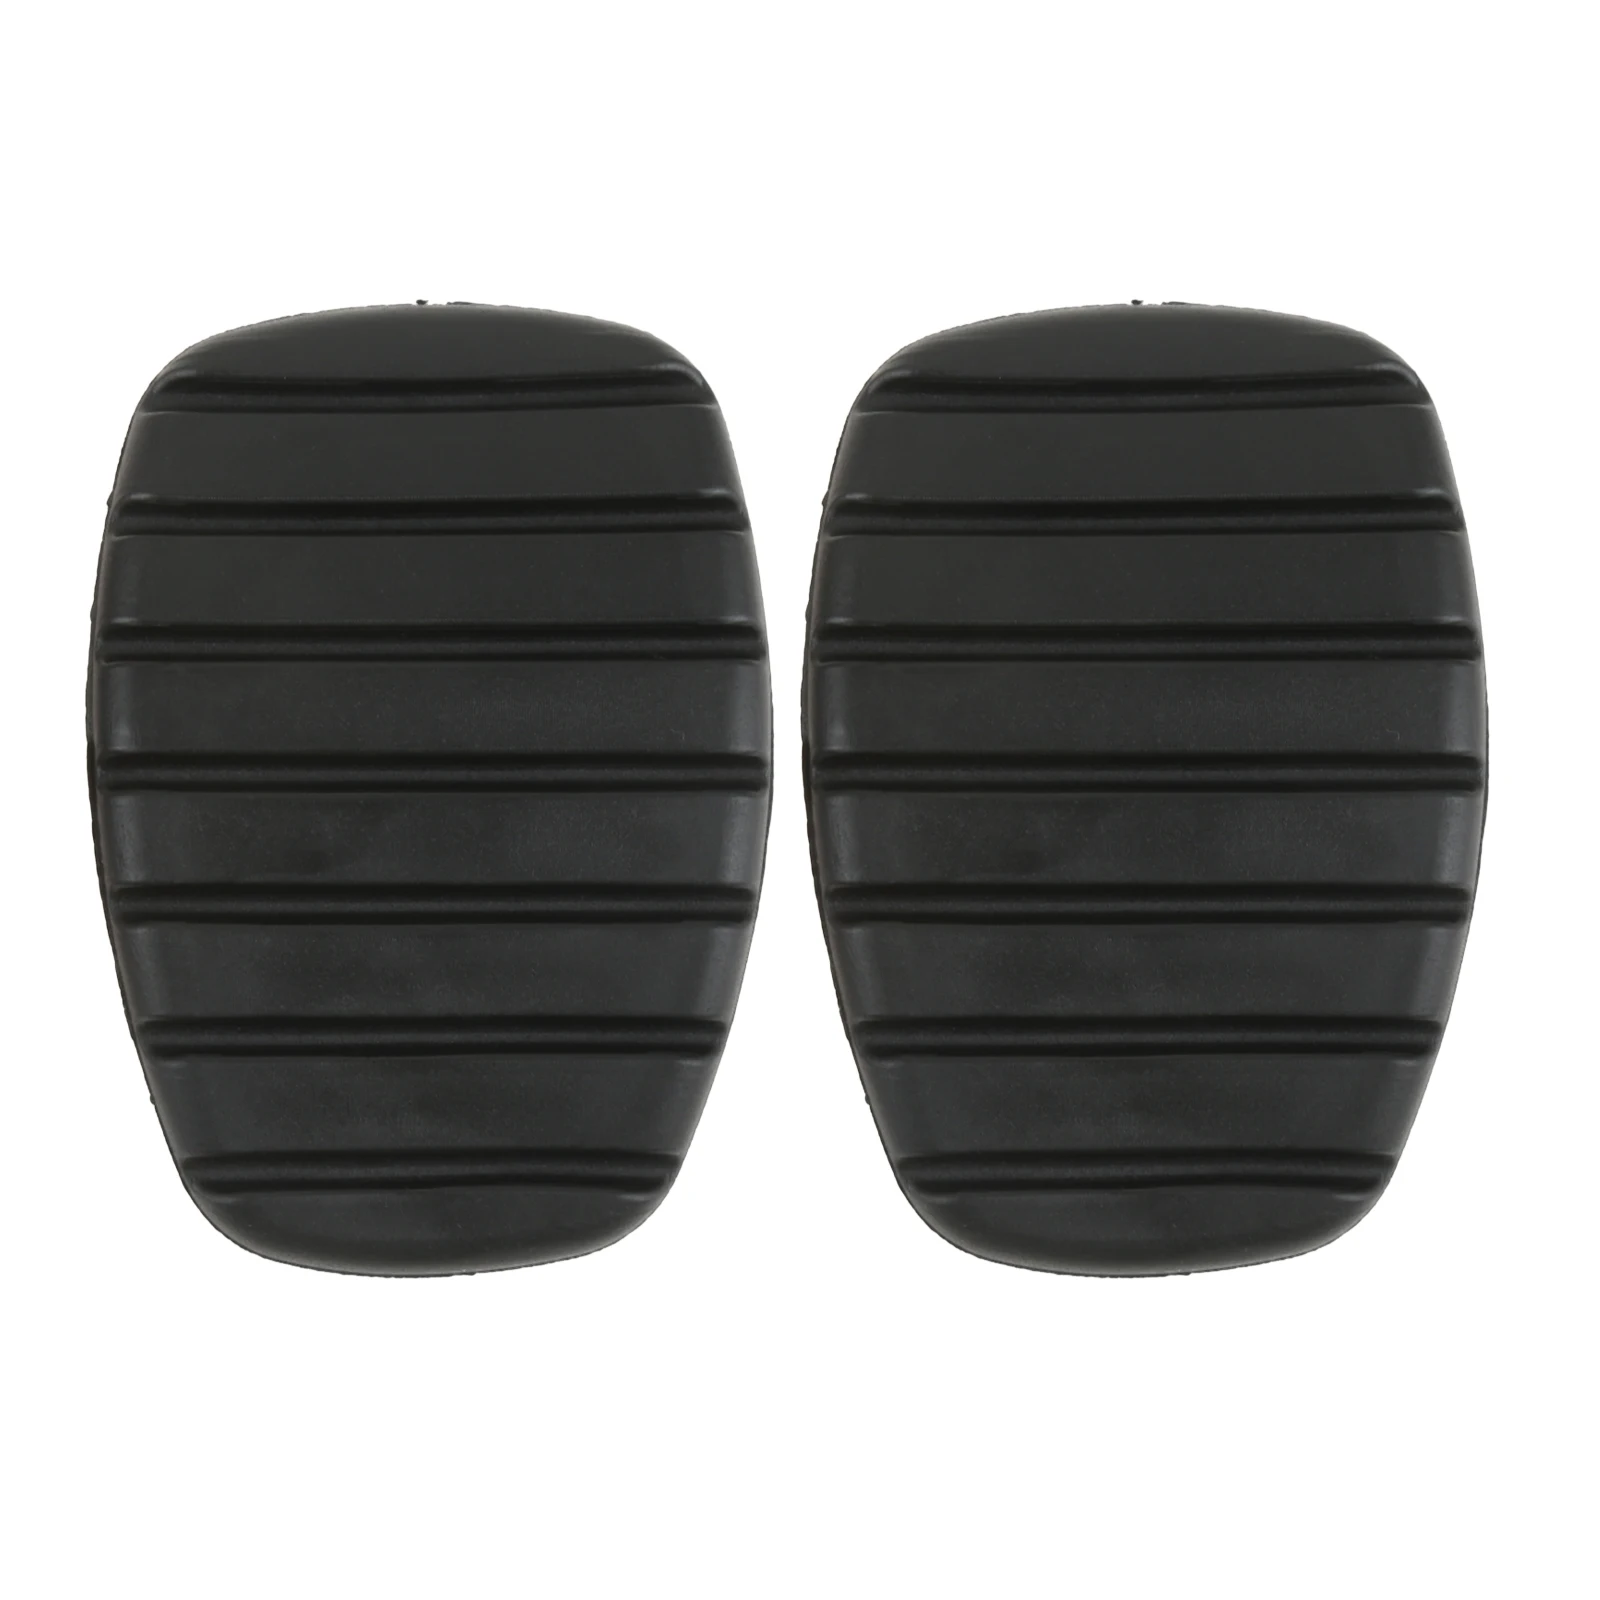 2Pcs Car Brake Clutch Foot Pedal Pad Part Cover 8200183752 for Renault S... - $13.37